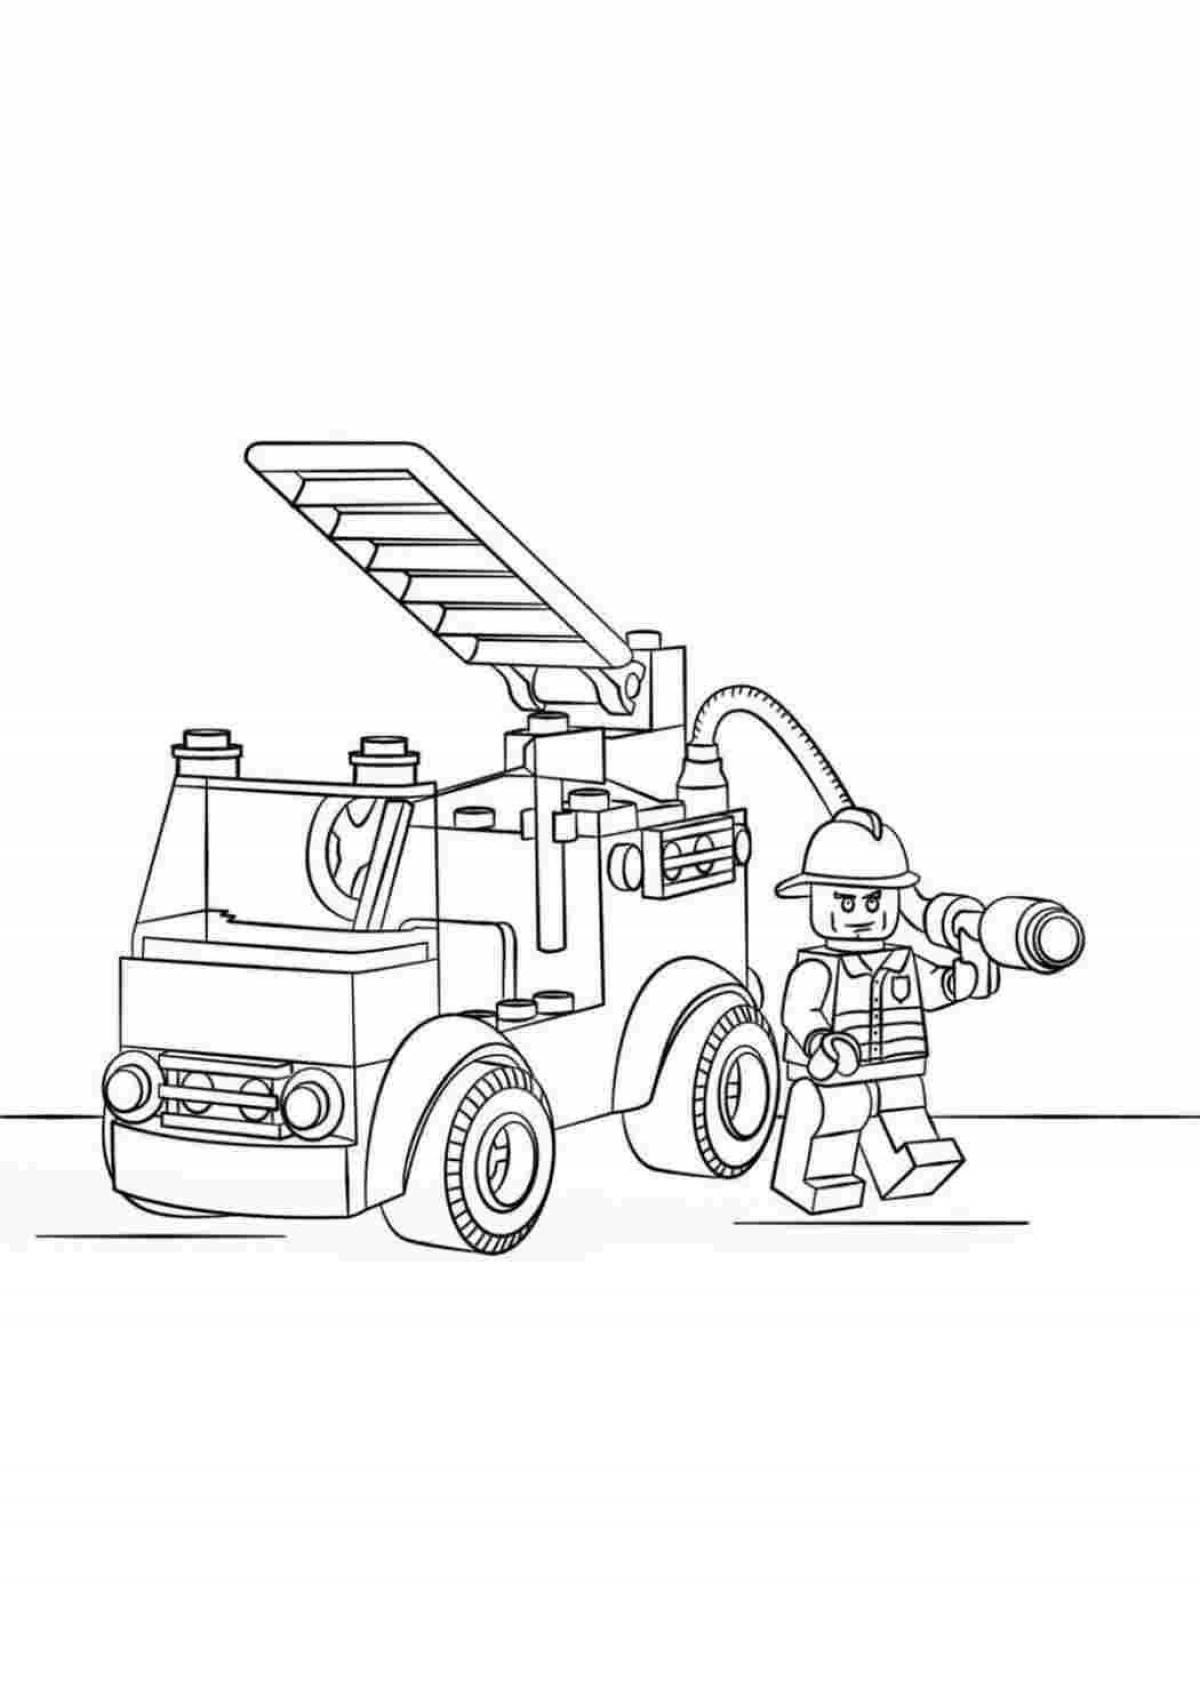 Finley elegant fire engine coloring page